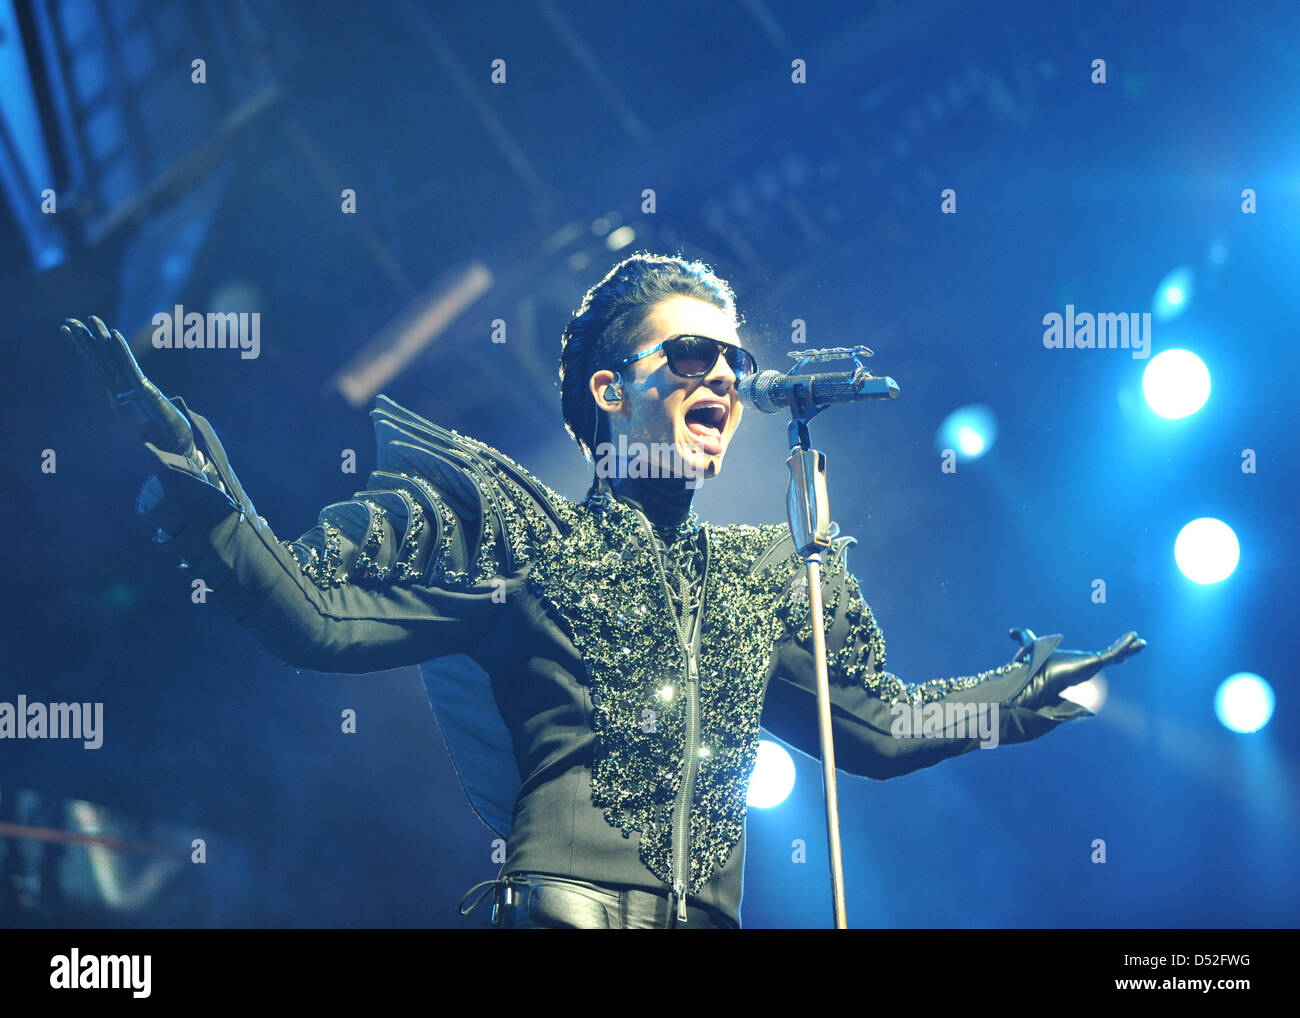 Bill Kaulitz, singer of the band 'Tokio Hotel', performs at Koenig Pilsener Arena stadium in Oberhausen, Germany, 26 February 2010. The first of two concerts in Germany takes place within the scope of a European tour. Photo. Joerg Carstensen Stock Photo